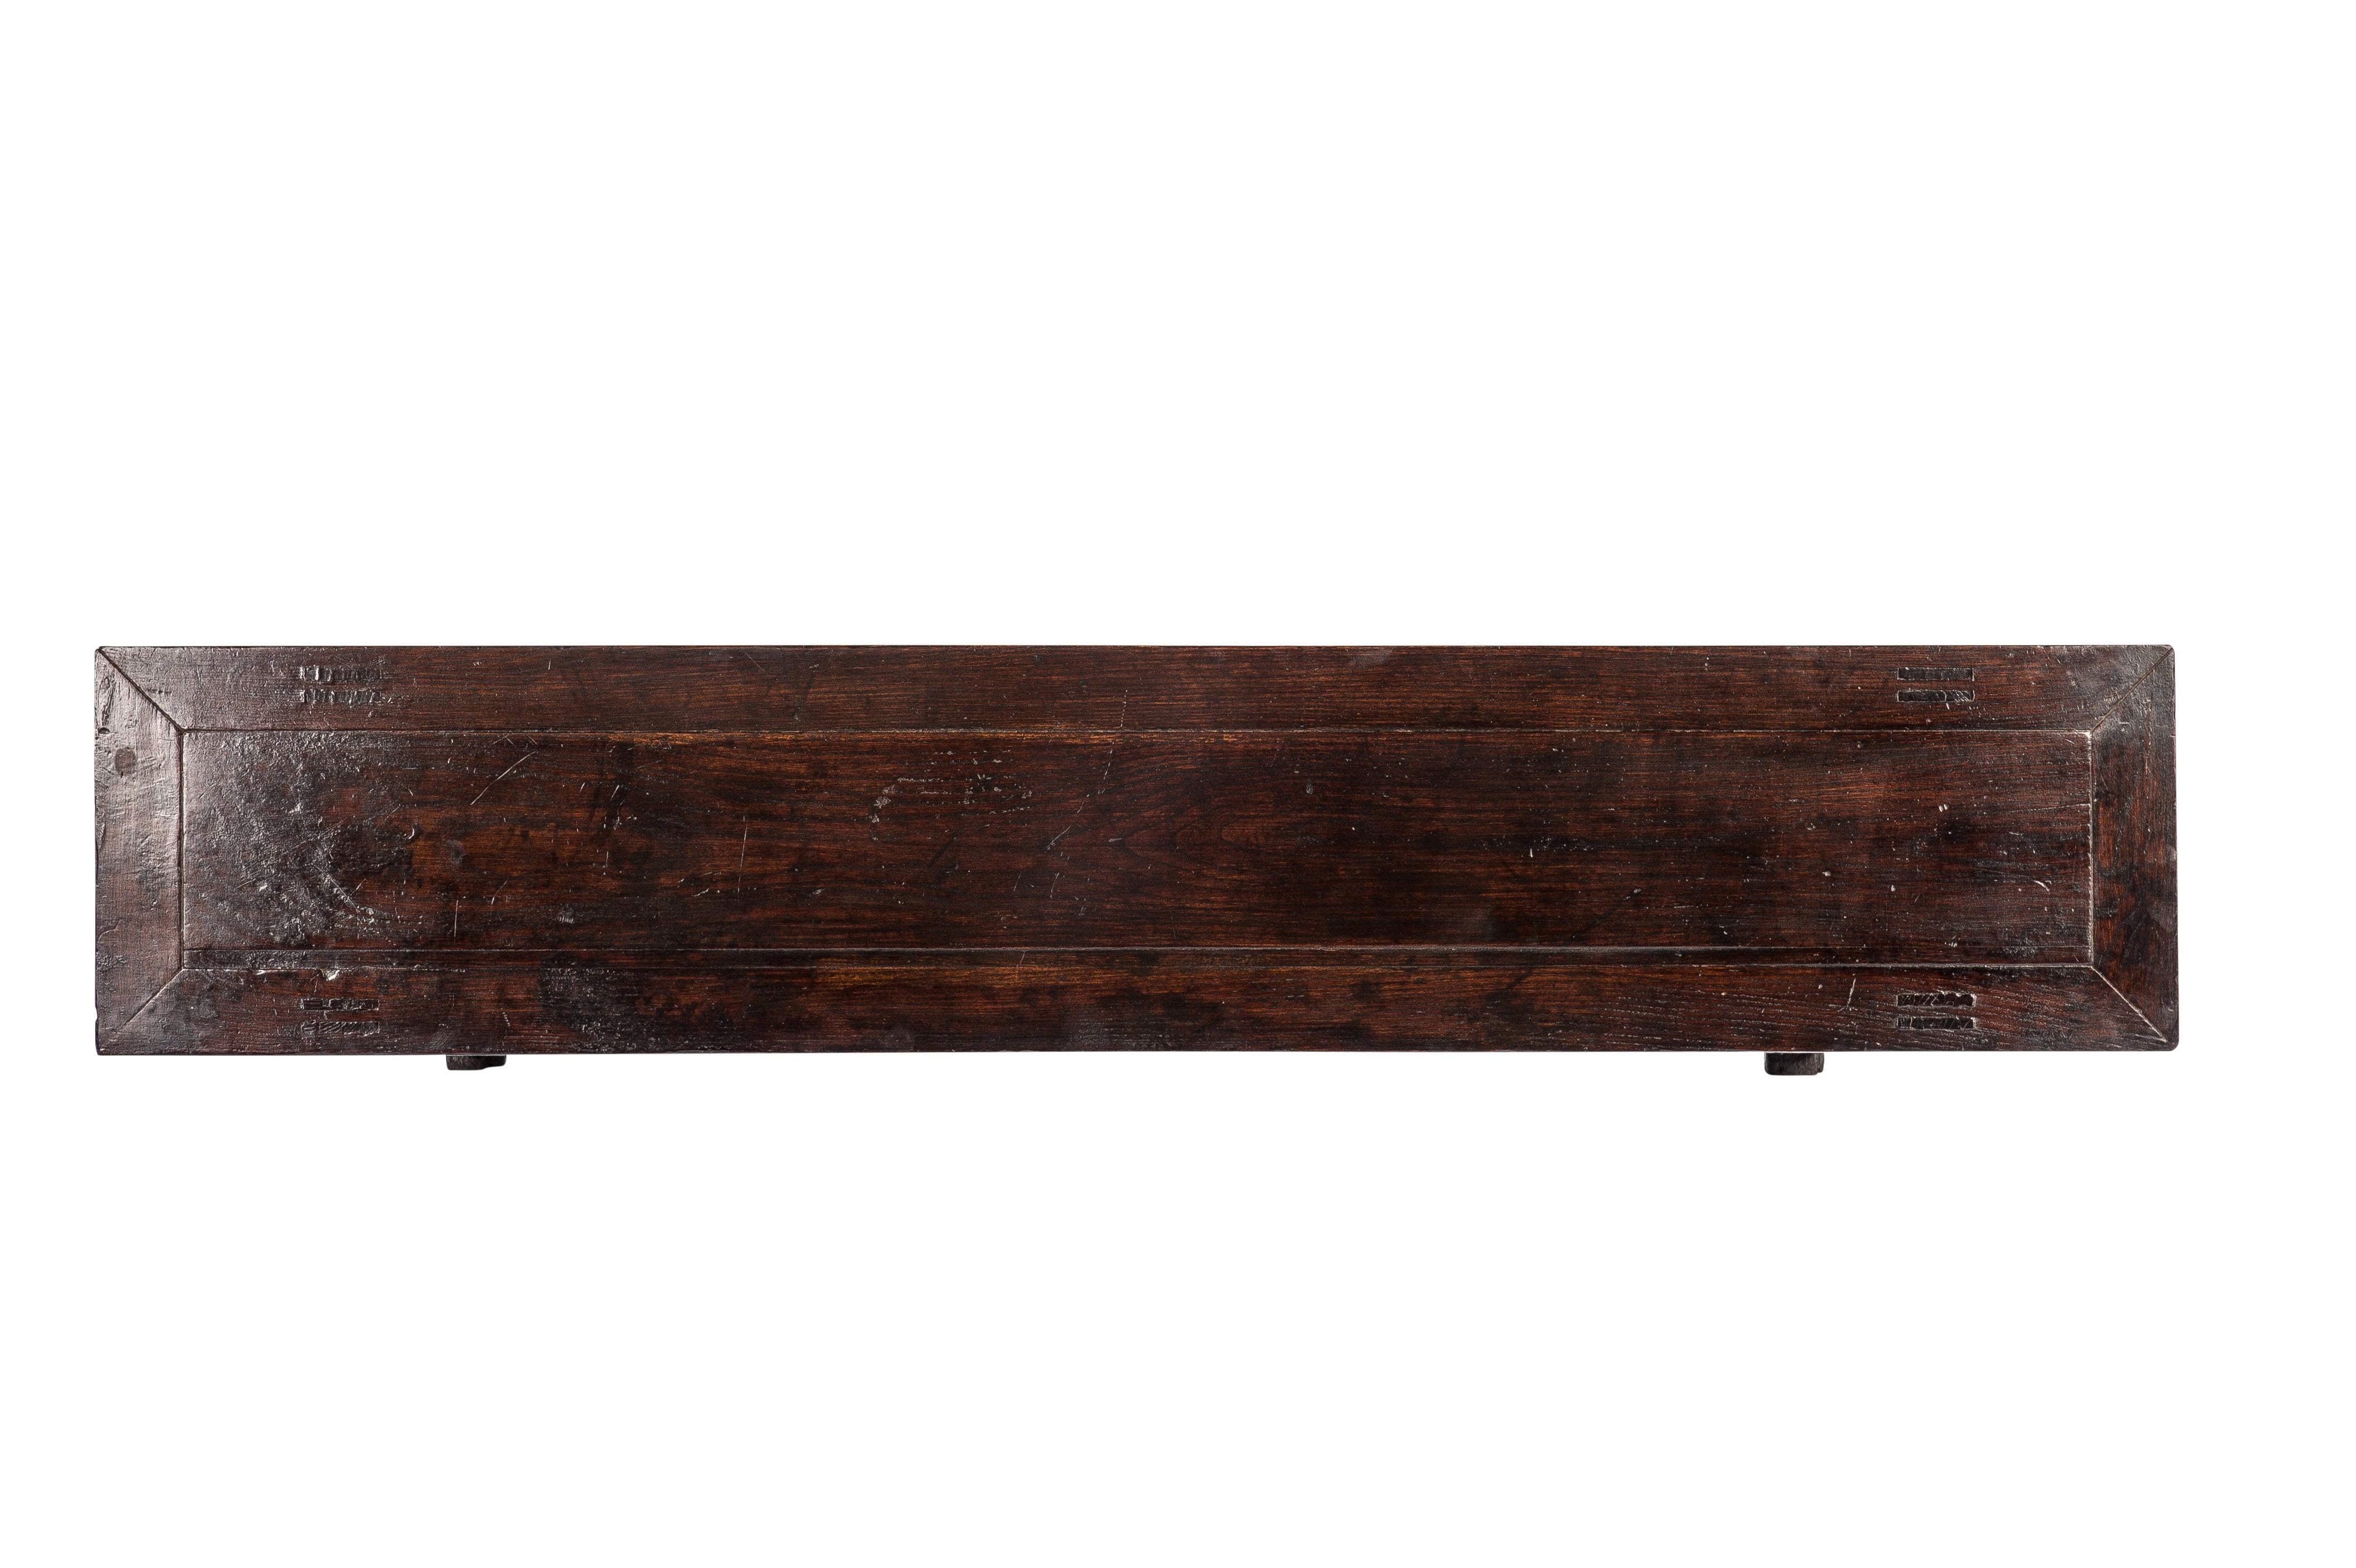 This elegant Altar table was made in the Chinese Shanxi period and dates approximately 1850. 
It is well constructed using mortise and tenon joinery techniques as was common on these tables. 
The altar table has a floating panel top with three